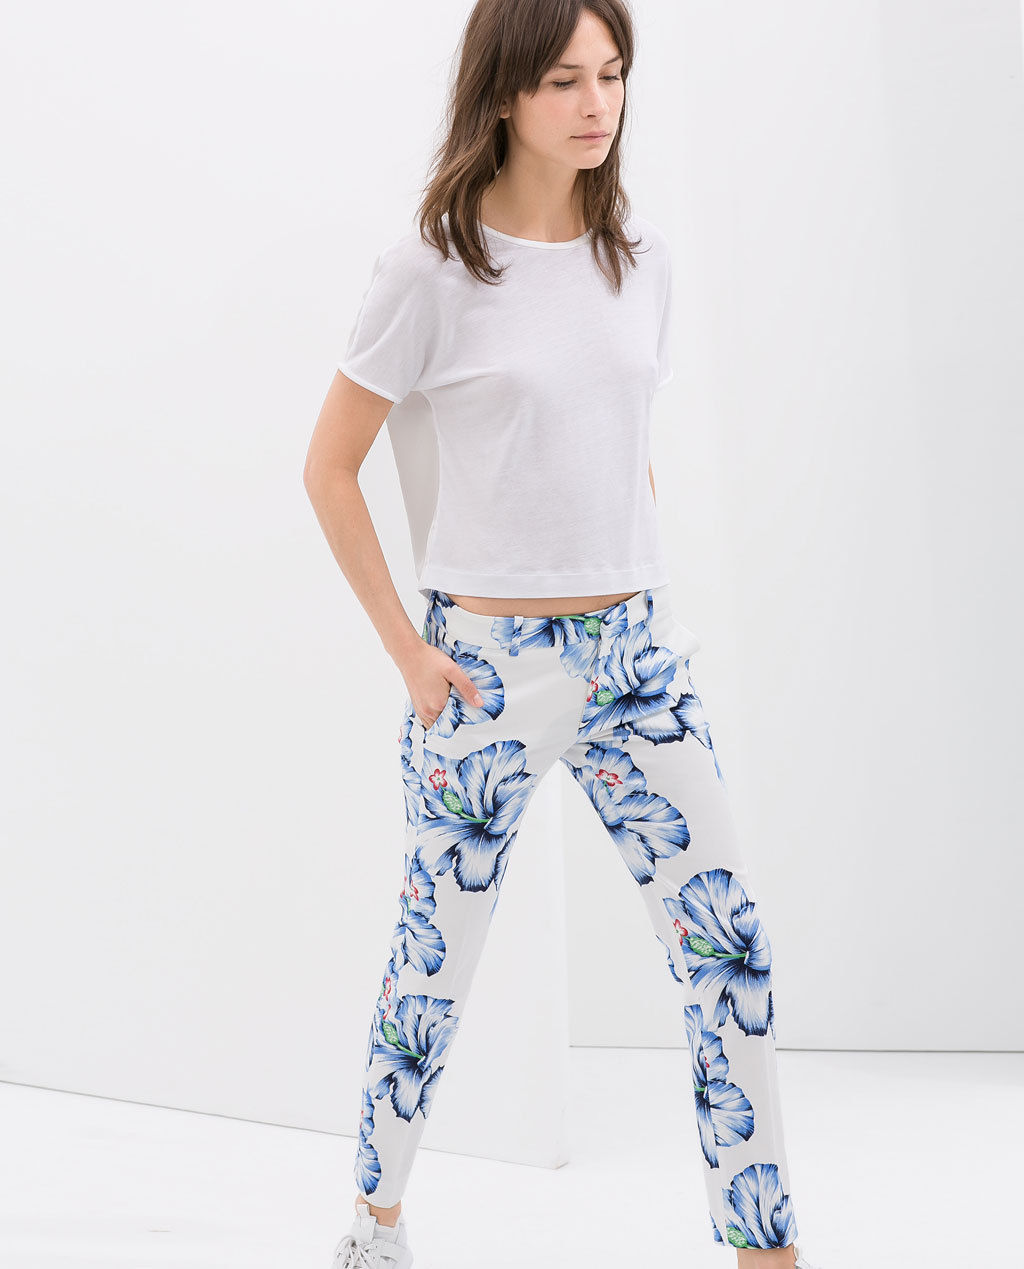 My Shopping Bag: Floral Trousers and Printed Tees - FASHION AND